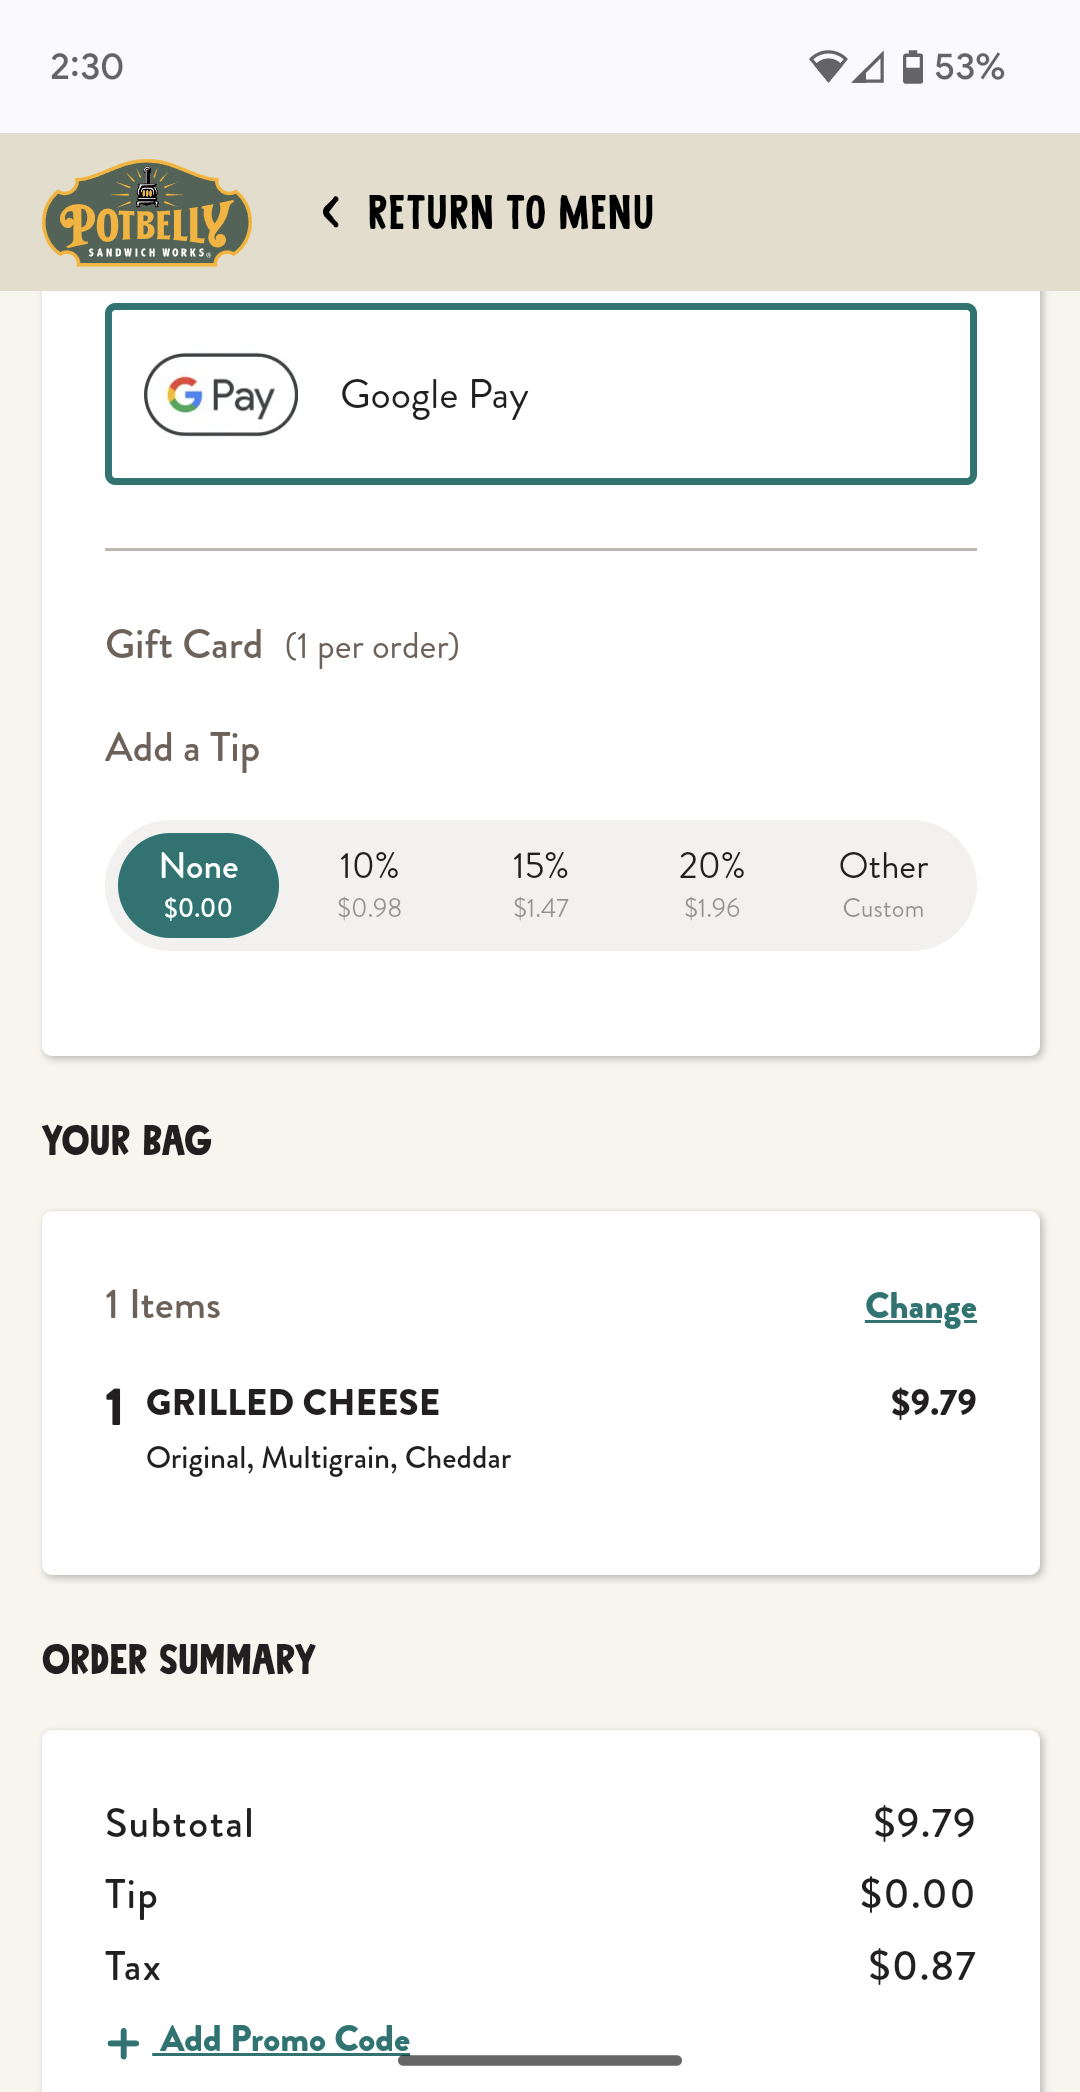 Potbelly Sandwich Works accepts Google Pay online.